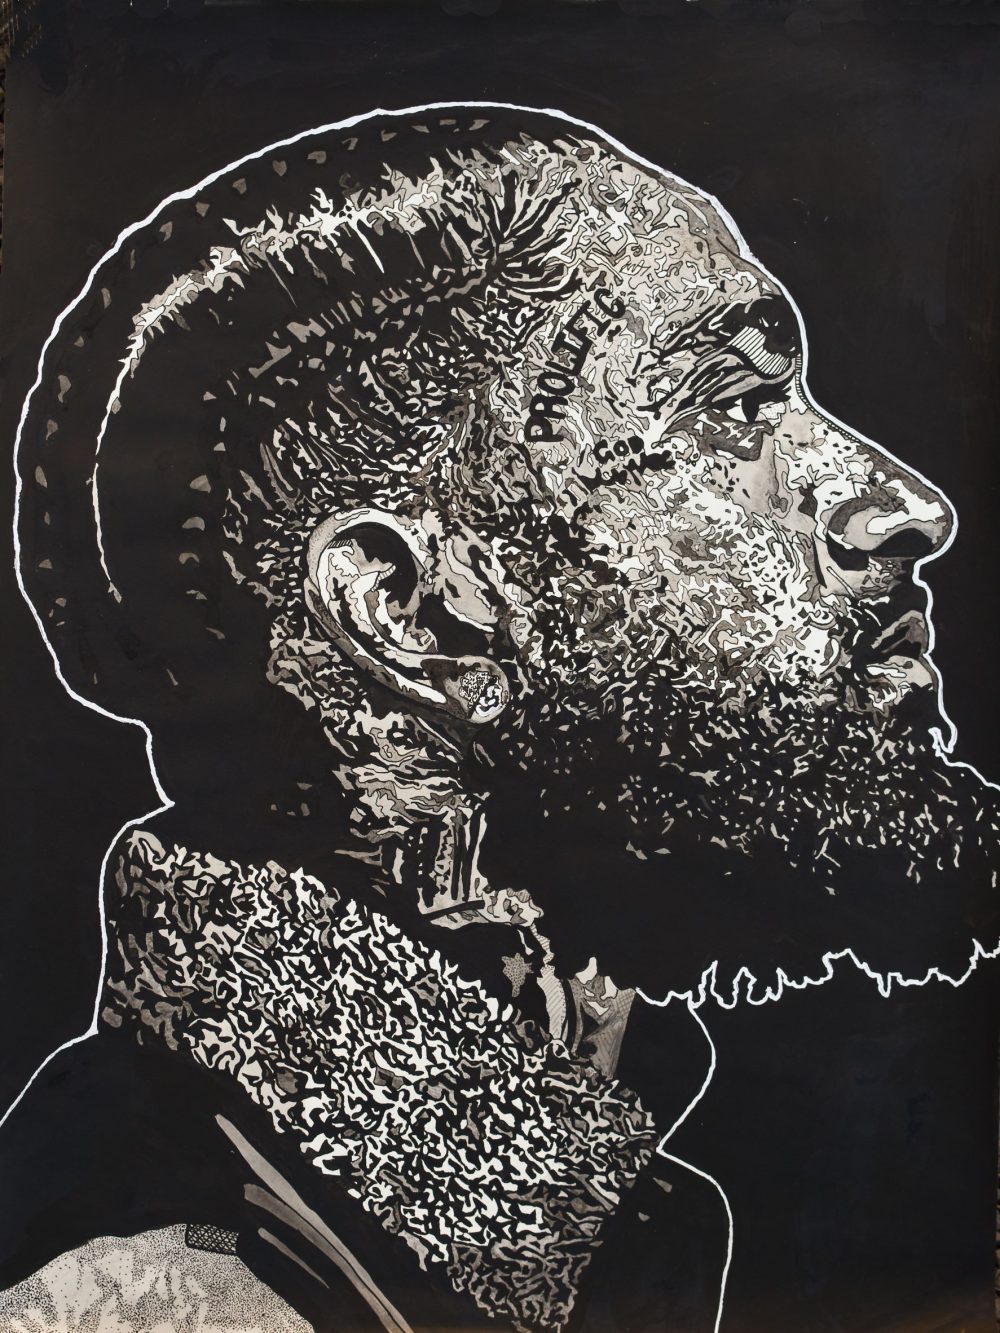 A black and white drawing with ink of the side profile of the artist Nipsey Hustle.